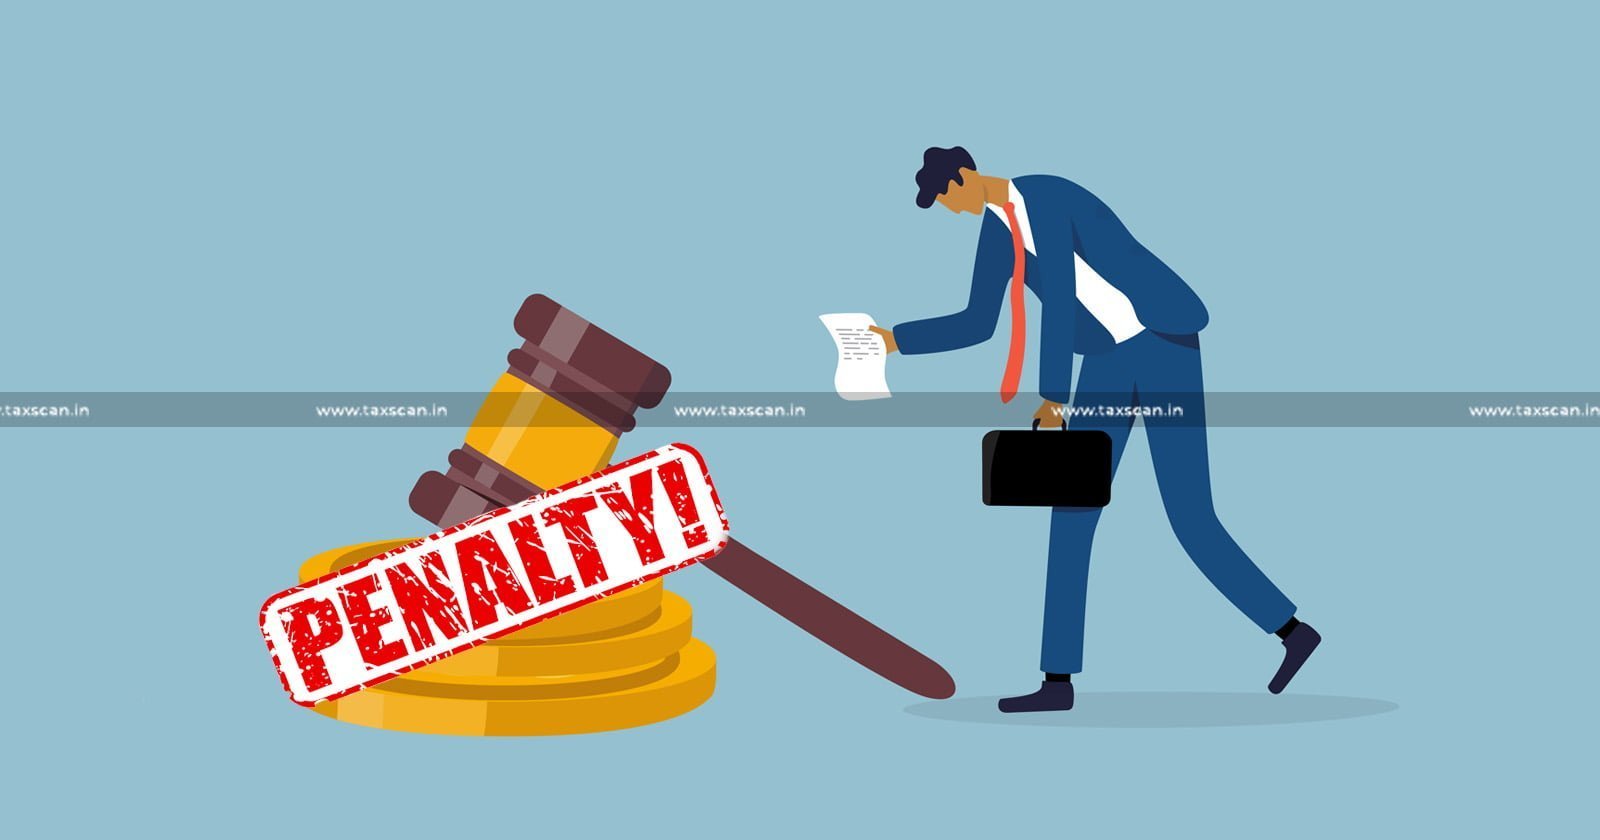 Penalty - IT Act - misreporting of income - ITAT directs re-adjudication - Penalty imposed IT Act - ITAT - re-adjudication - Taxscan